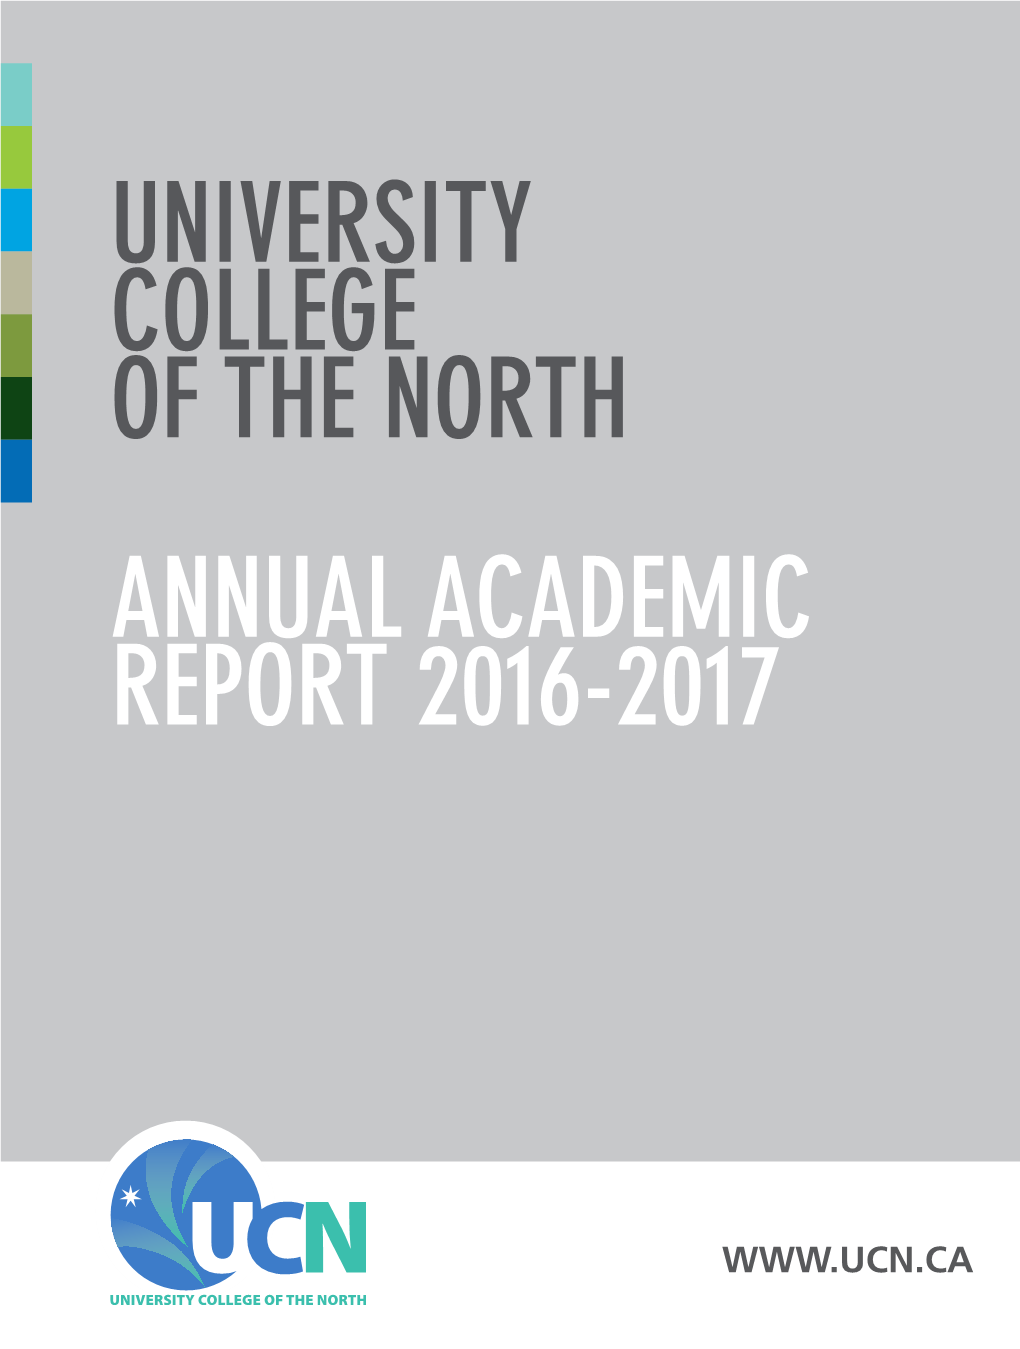 University College of the North Annual Academic Report 2016-2017